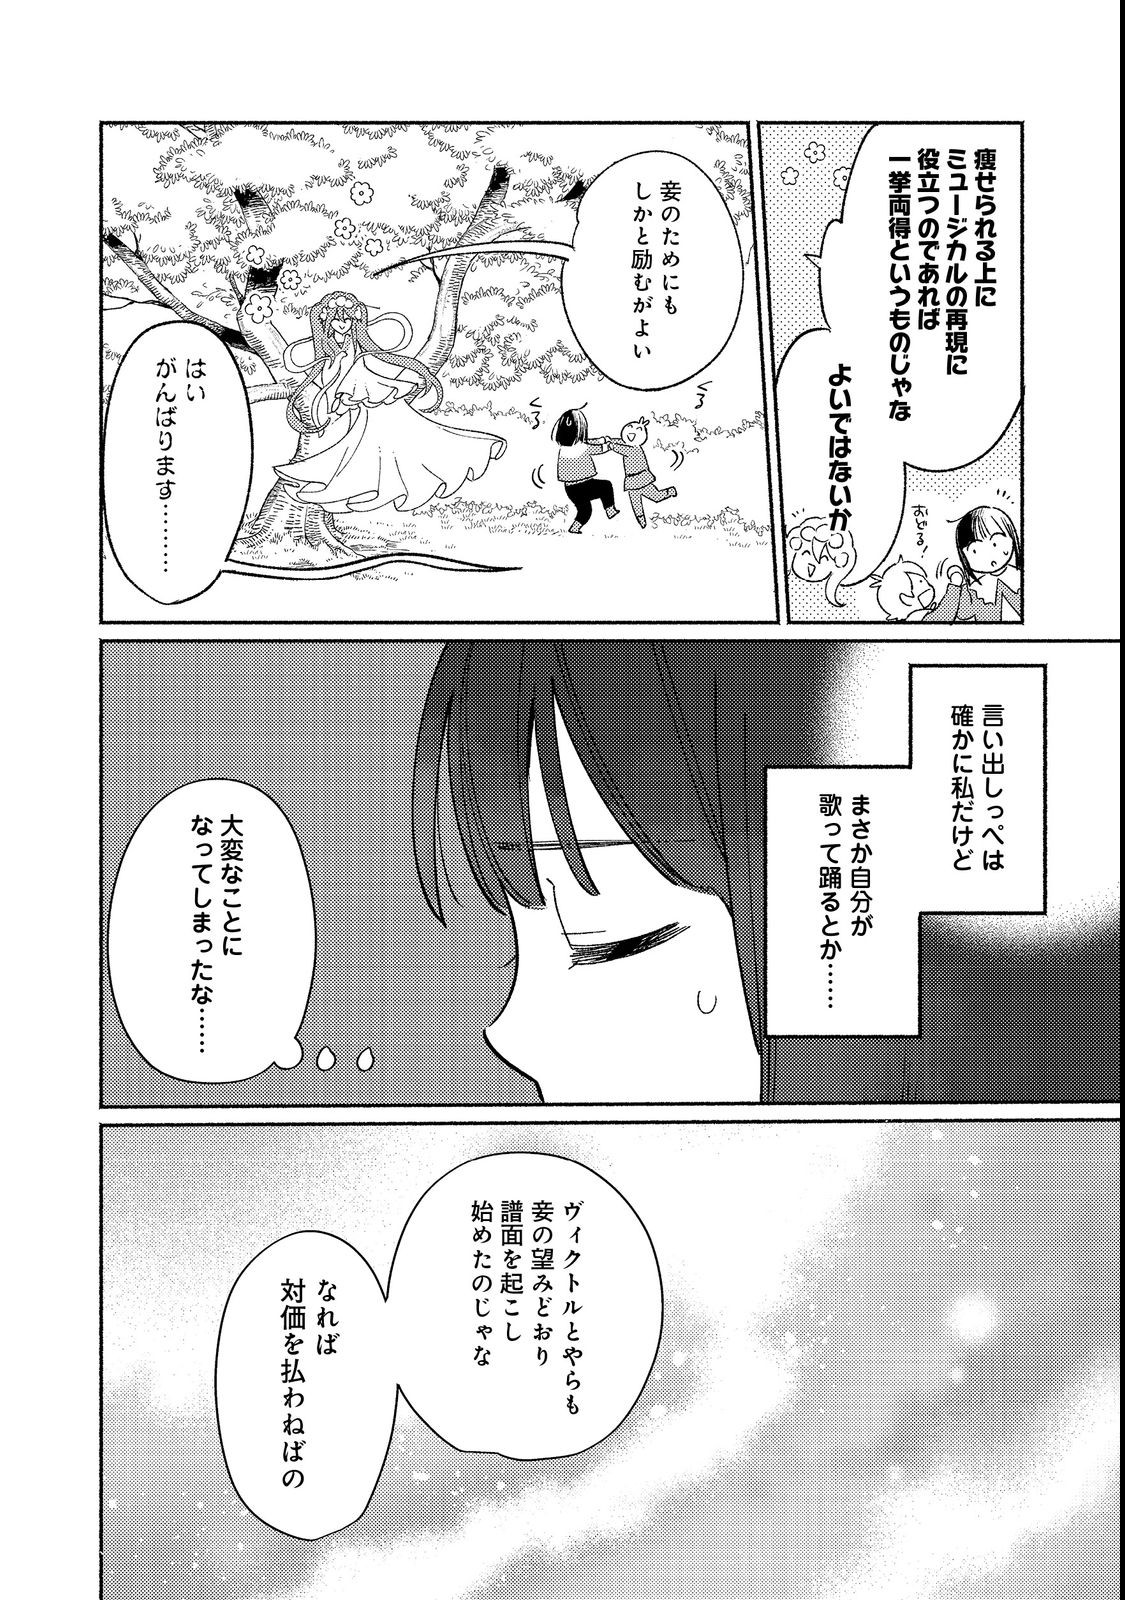 I’m the White Pig Nobleman 第17.2話 - Page 7